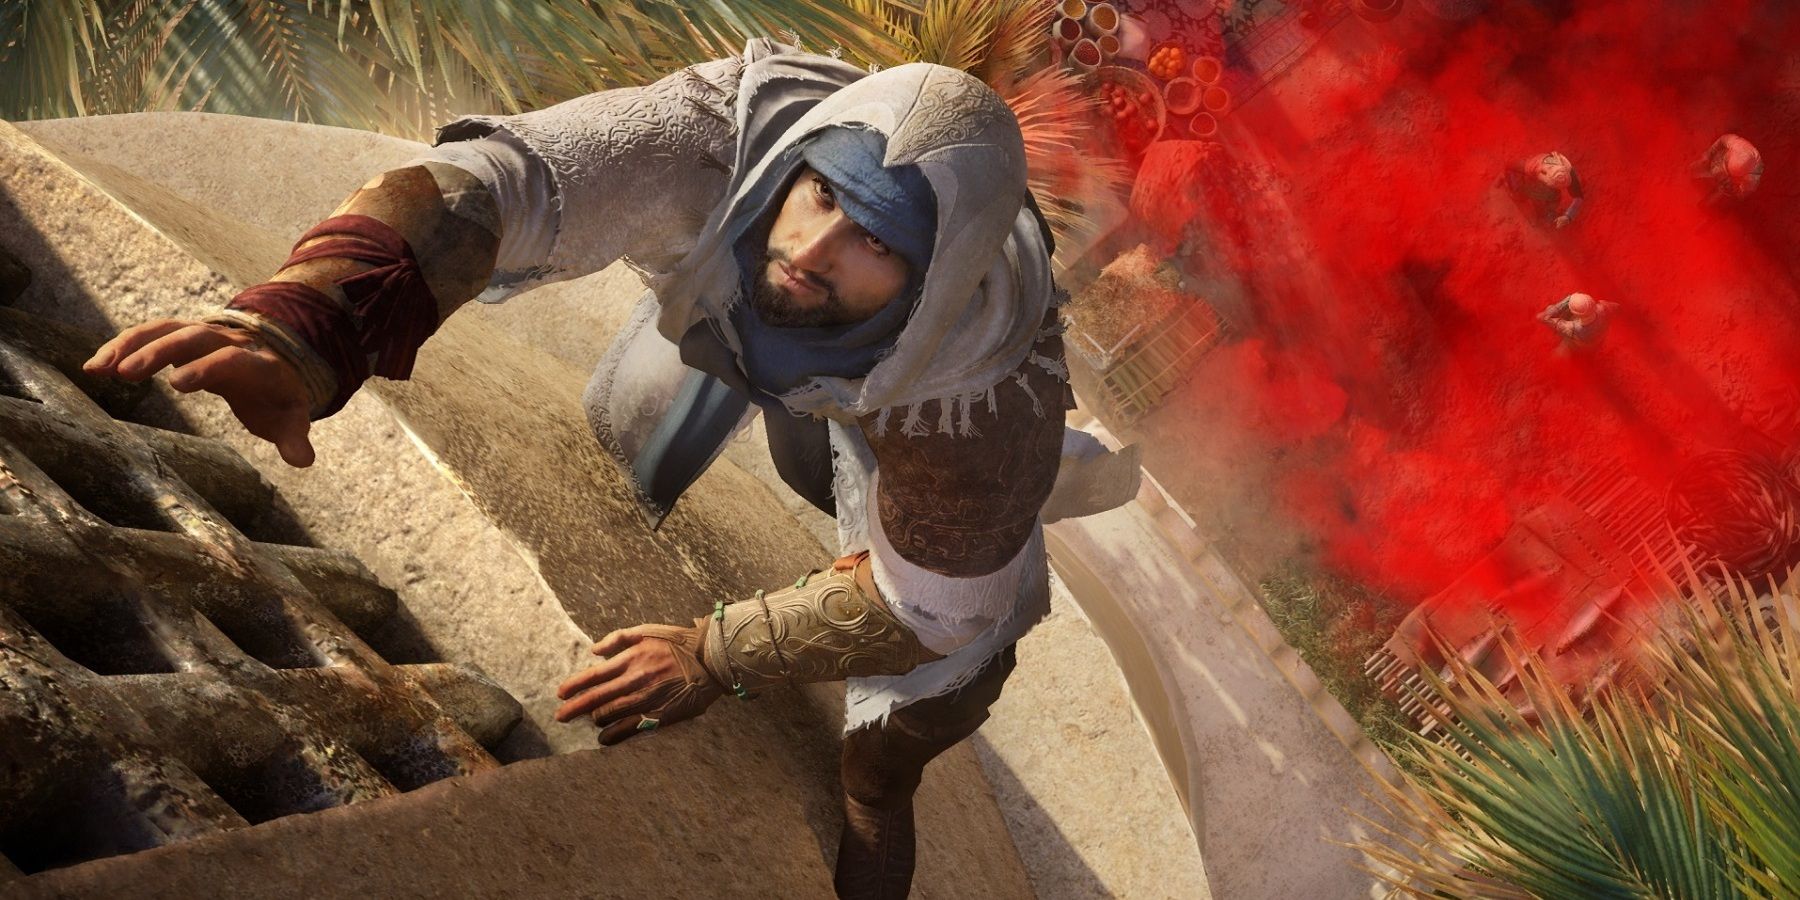 Ubisoft's Assassin's Creed Mirage: Why the Steam Exclusion is Disappointing, But Uplay Offers Exclusive Content and Rewards